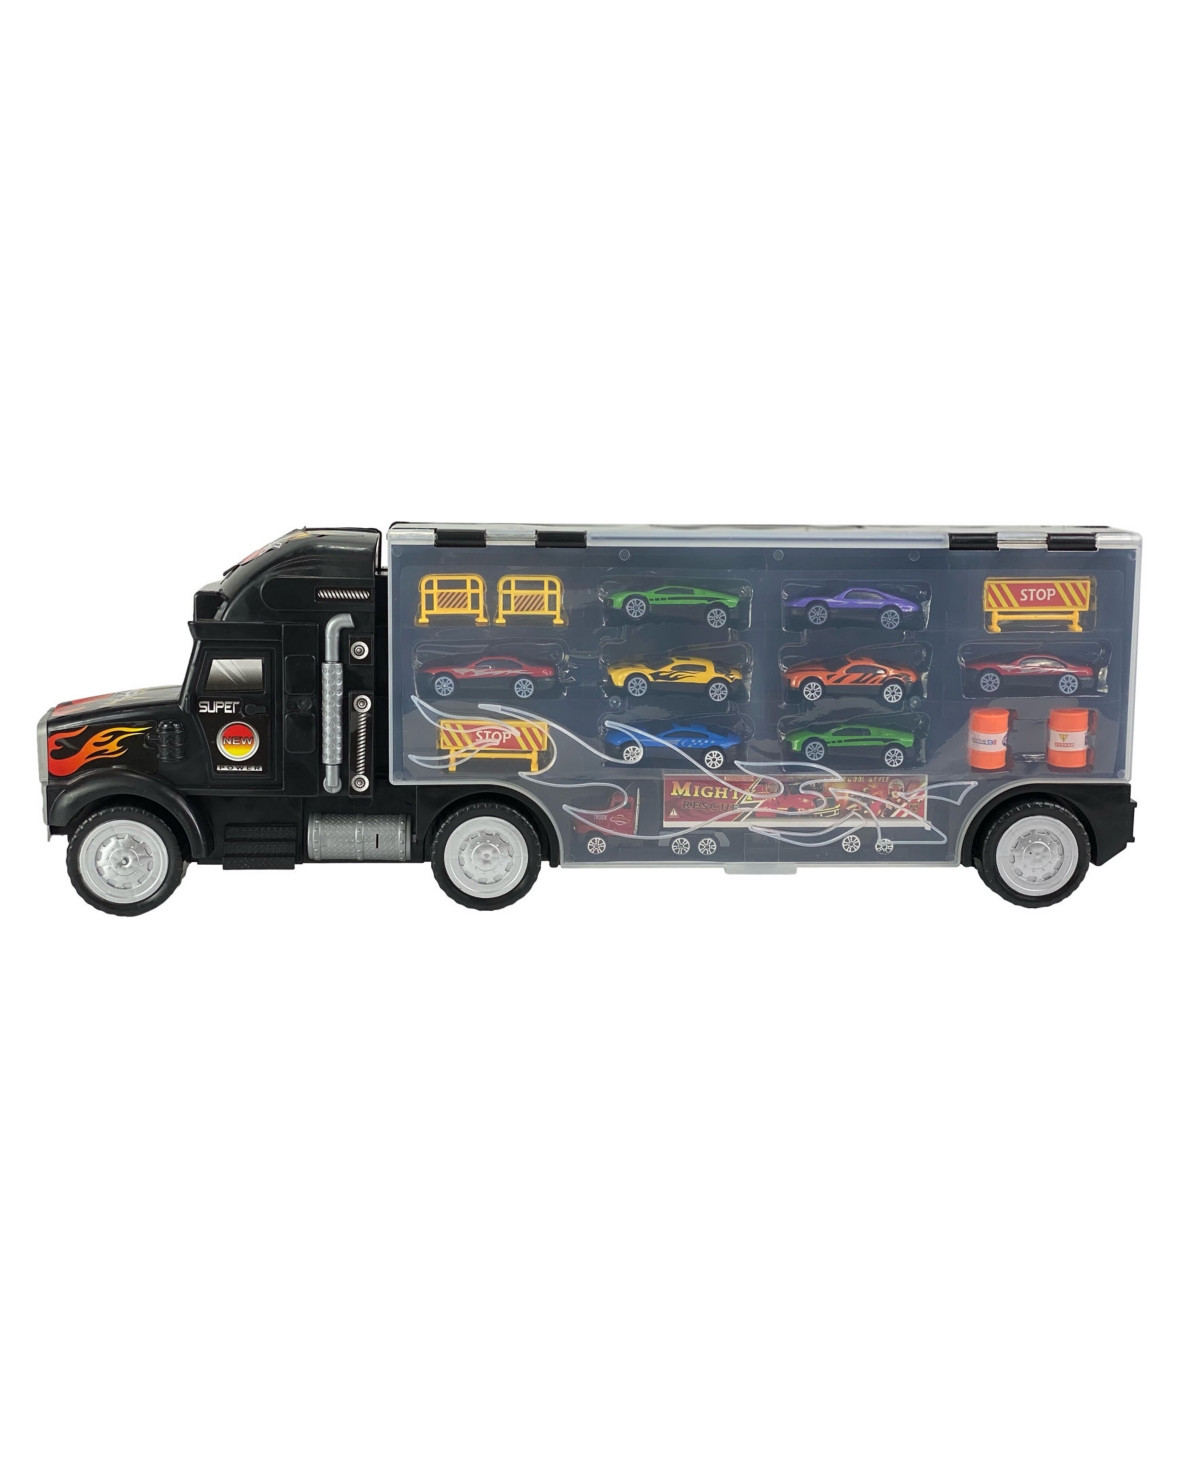 Big Daddy Mag-genius Mega Car Carrier Tractor Trailer With 6 Cars And Accessories Toy In Multi